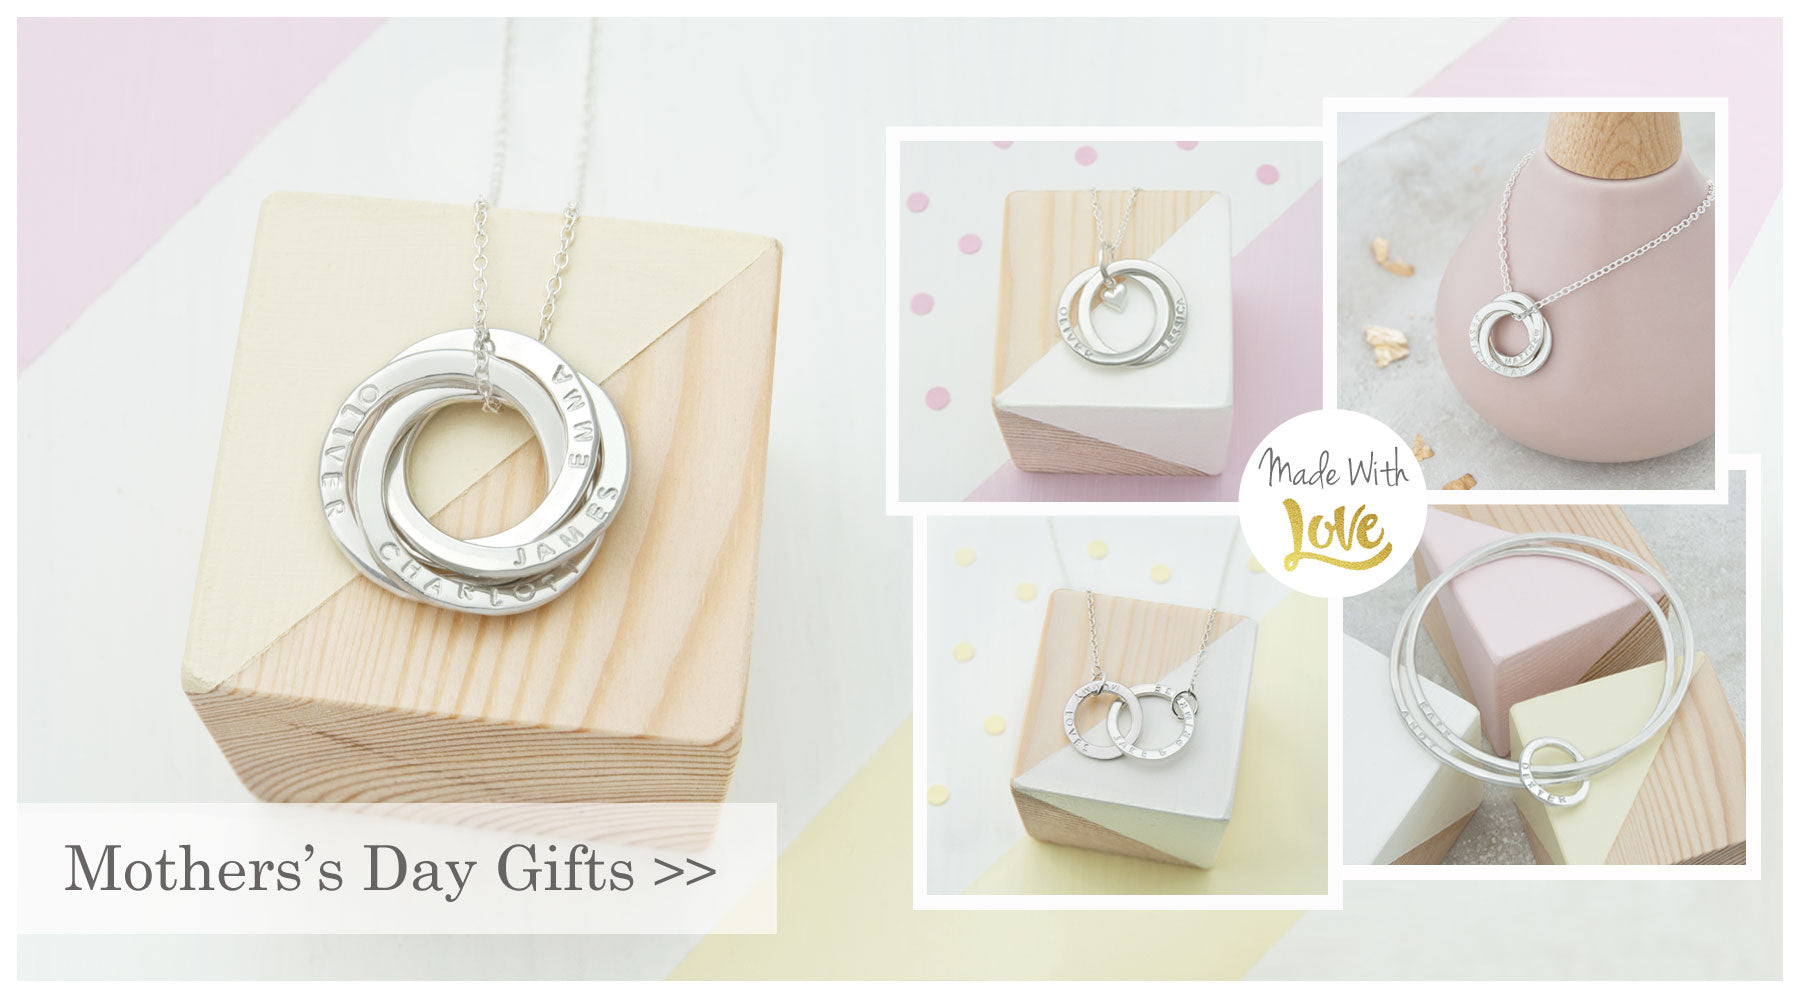 A collection of handmade necklaces handpicked to make fabulous for mother's day gifts